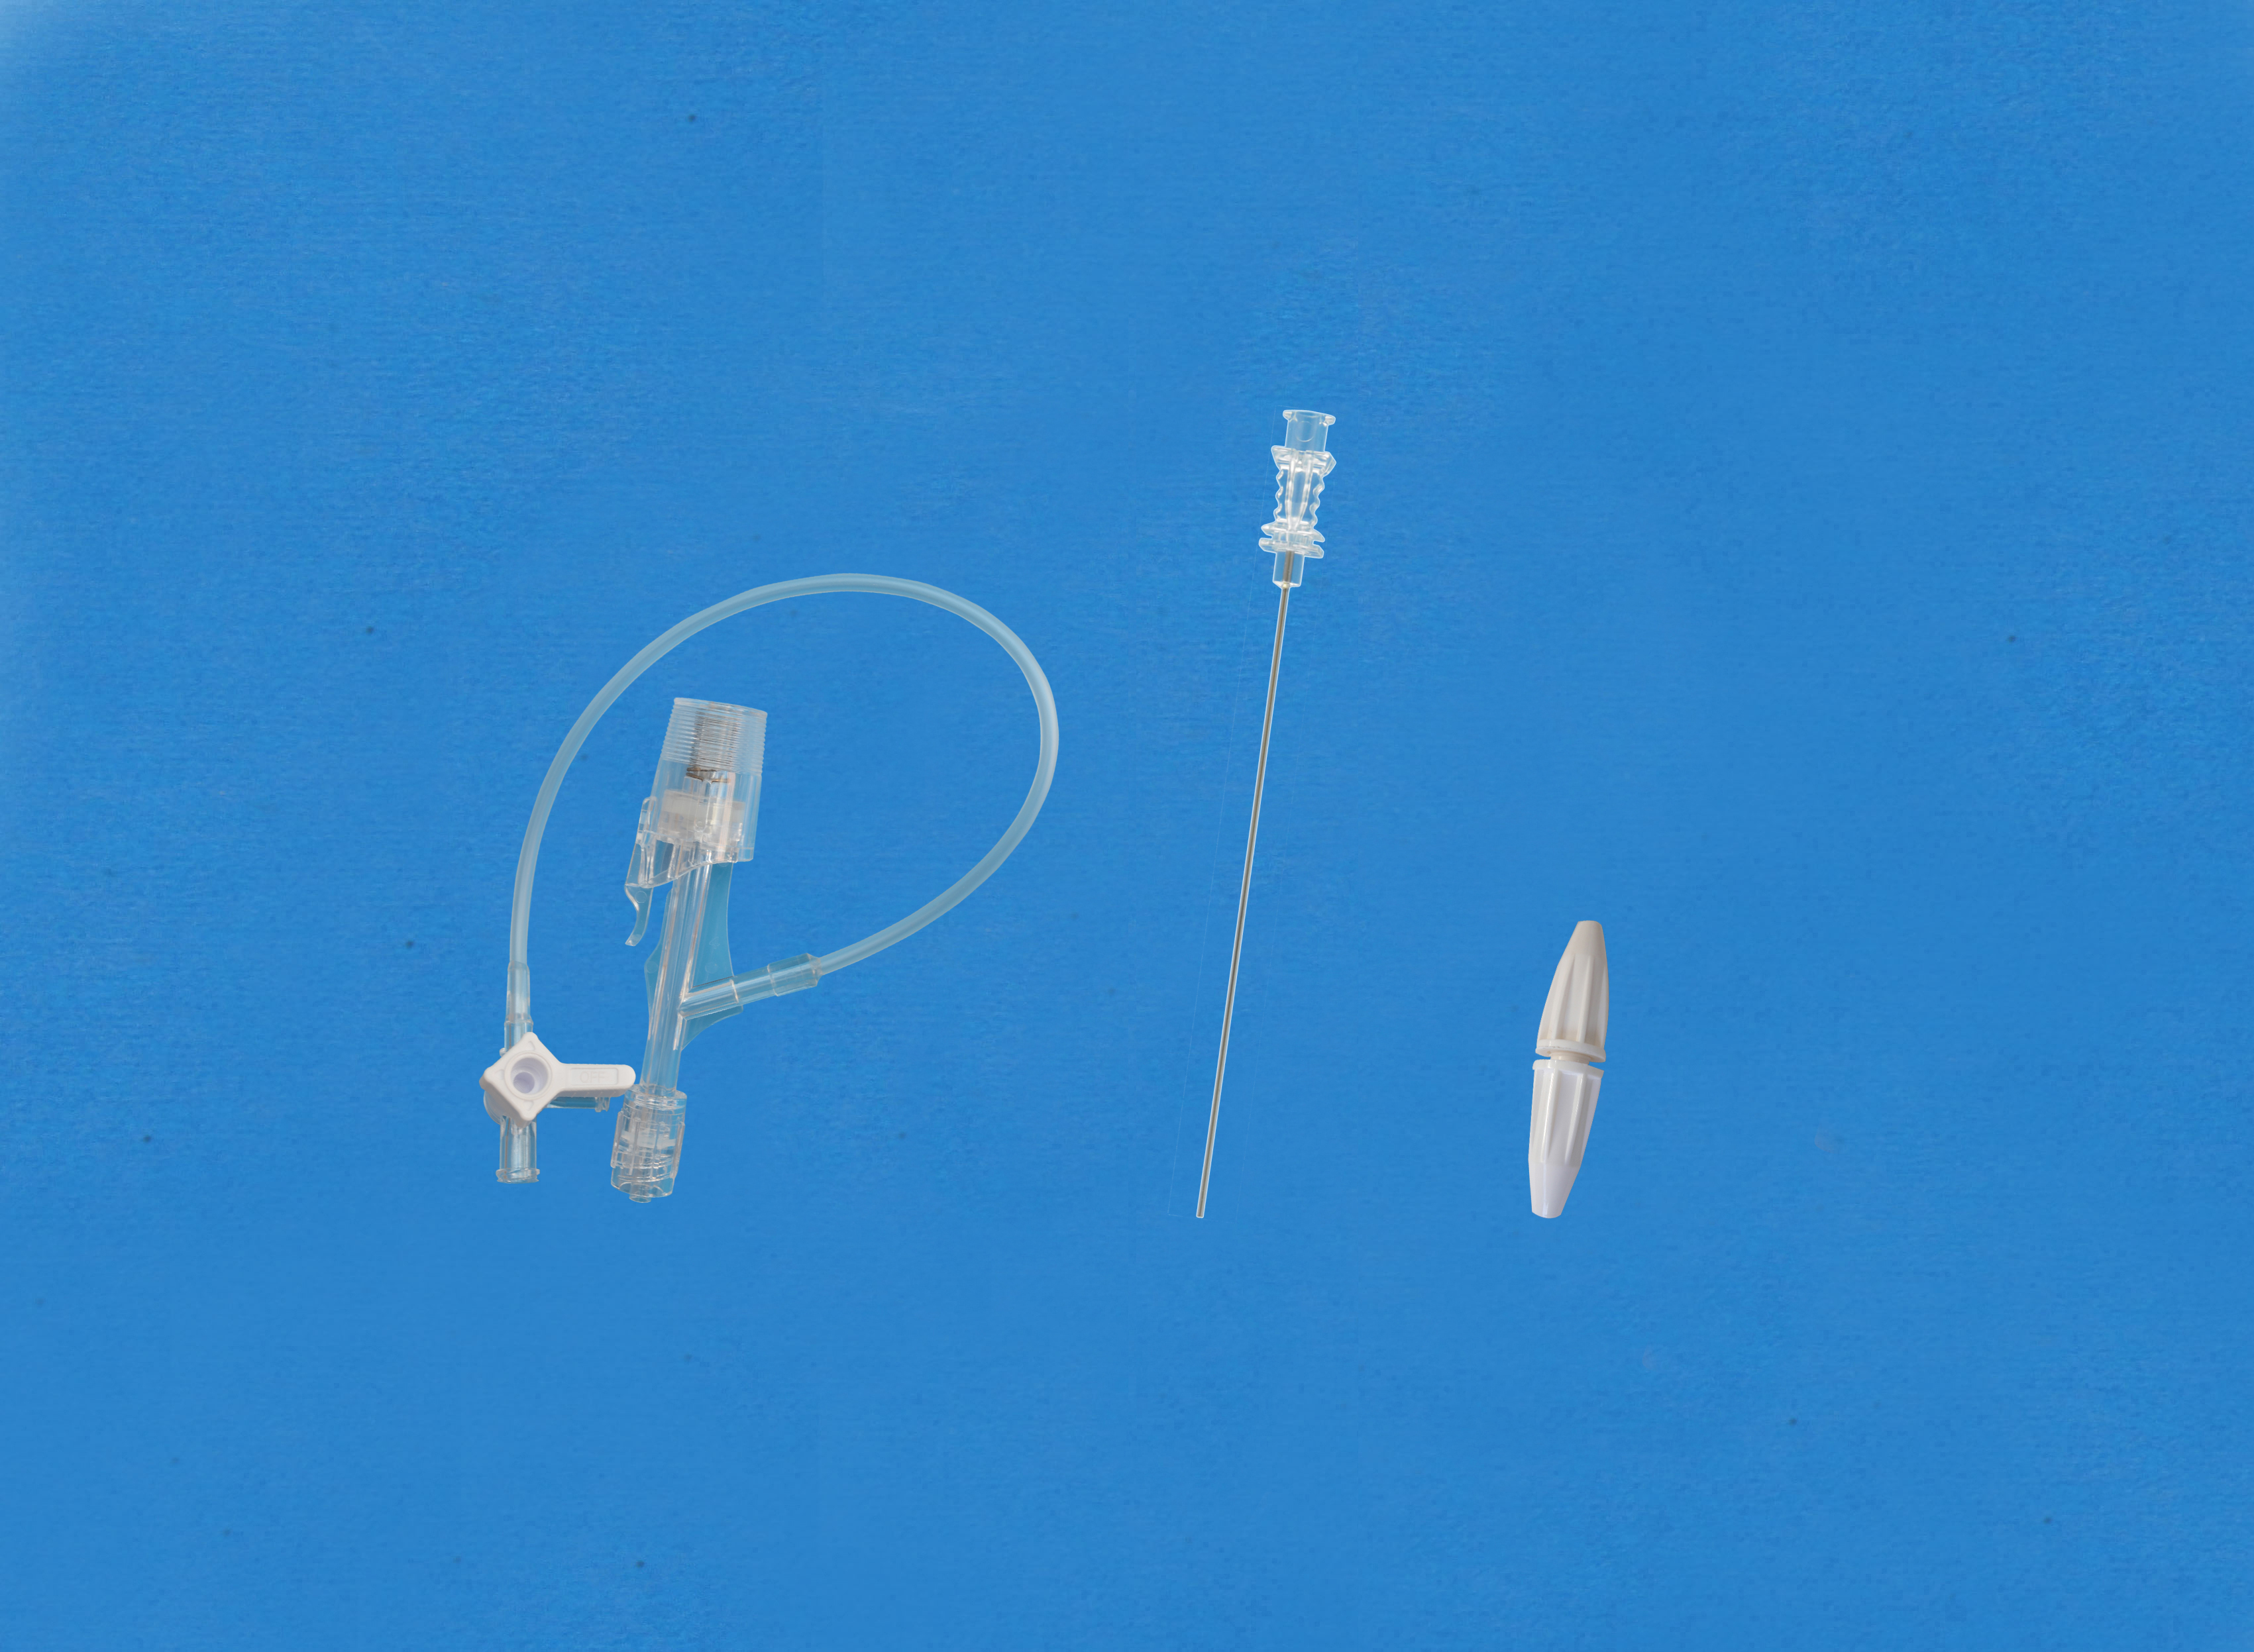 Haemostatic valves, Y click, Sideon Tubing and Stopcock, Insertion Tool with Large Hub, White/Plastic Torquer